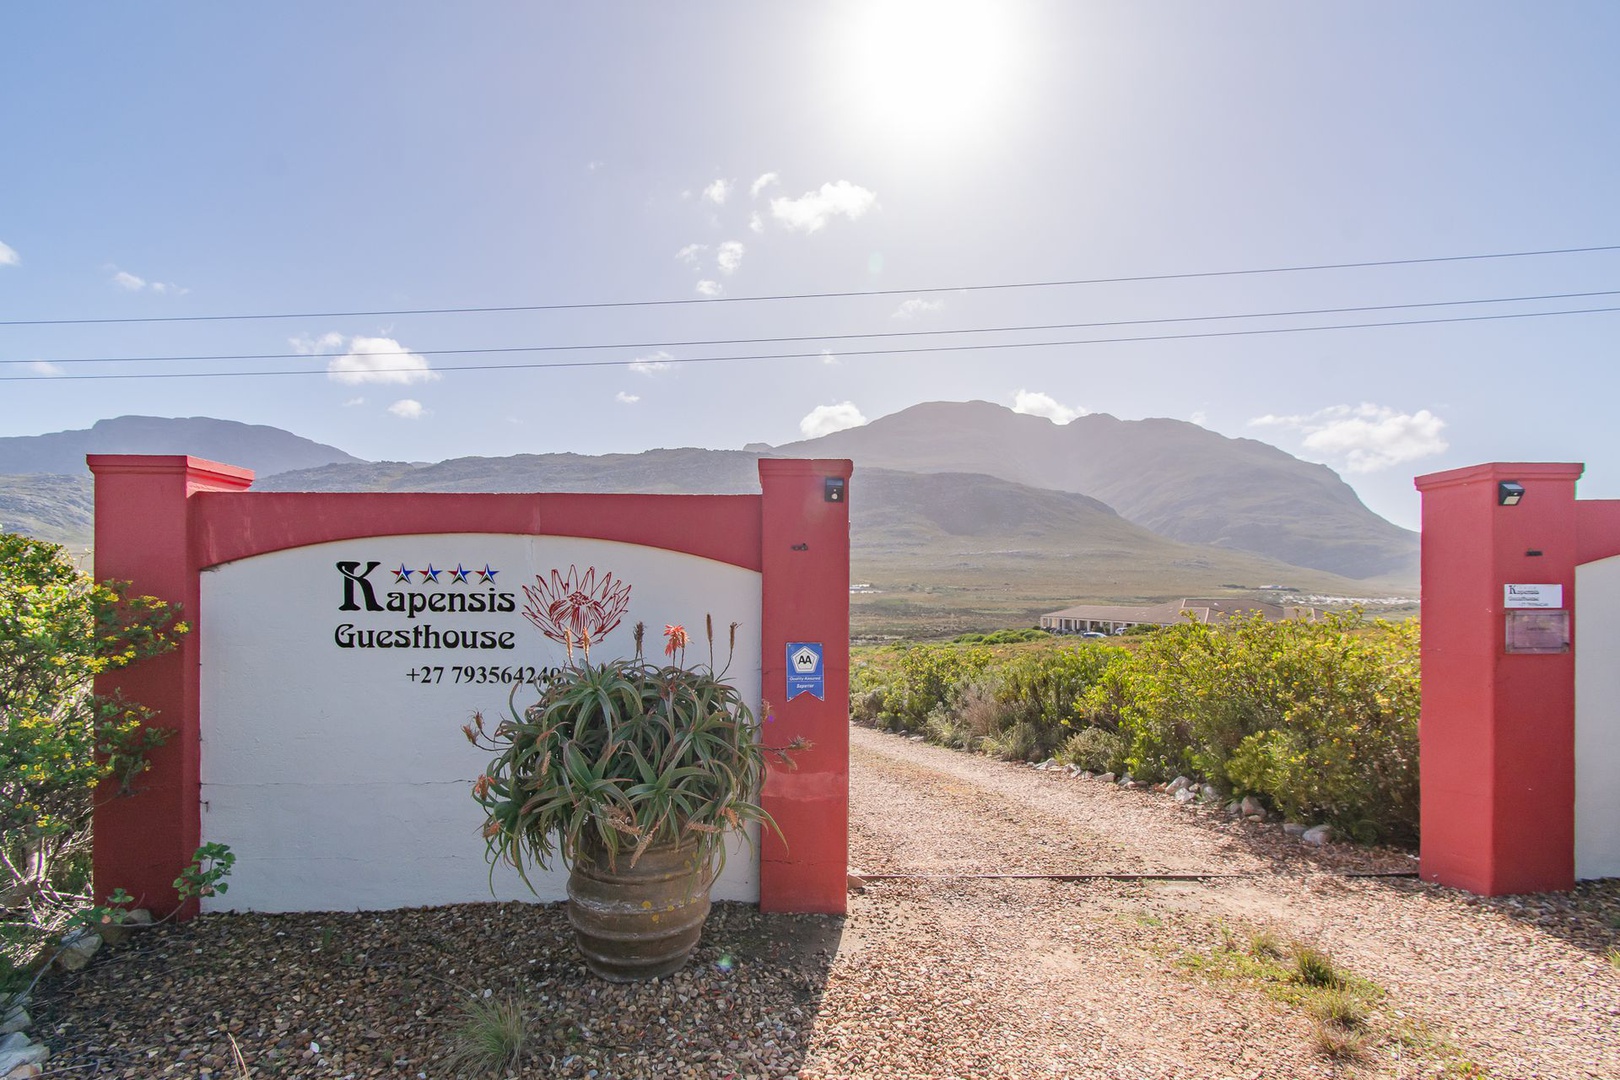 House in Pringle Bay Rural - Kapensis 4 star Guesthouse is located on a 8.56ha farms in Rural Pringle Bay